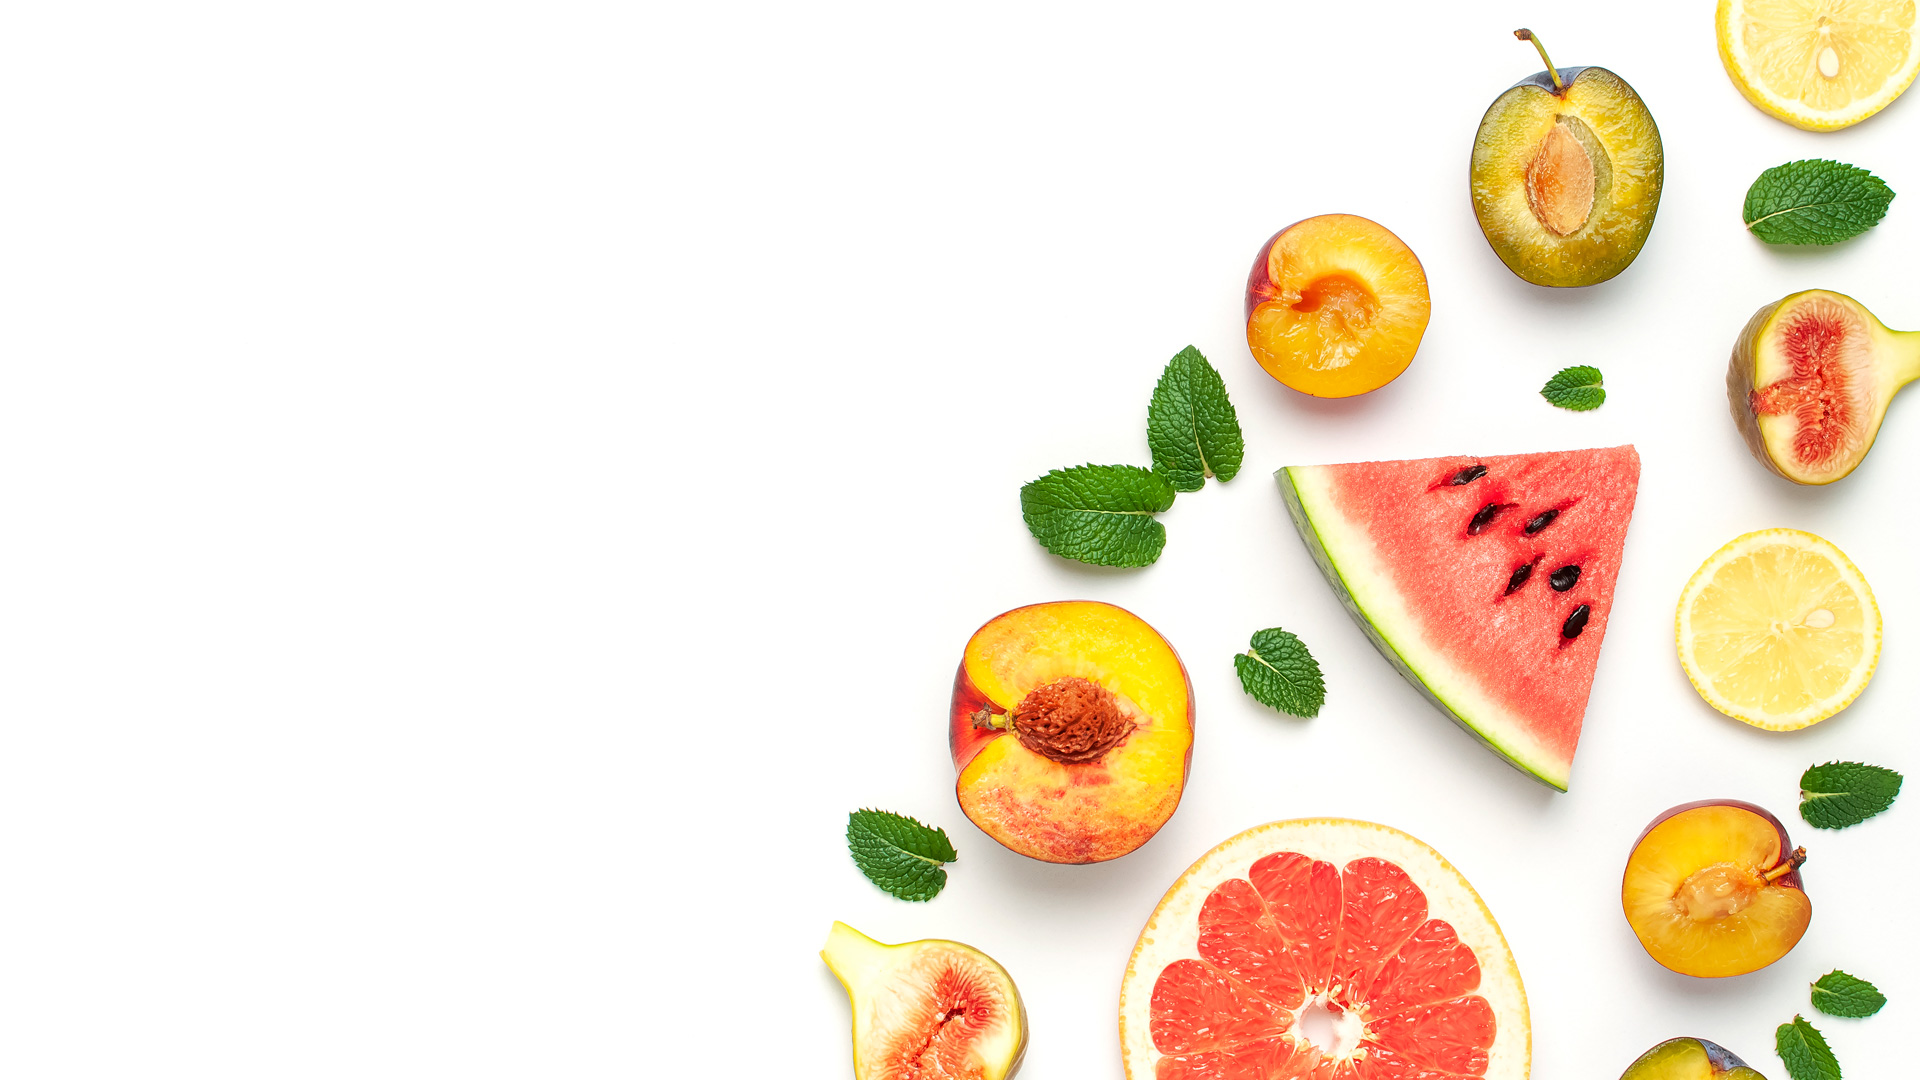 Assorted fresh fruits with mint on white background.